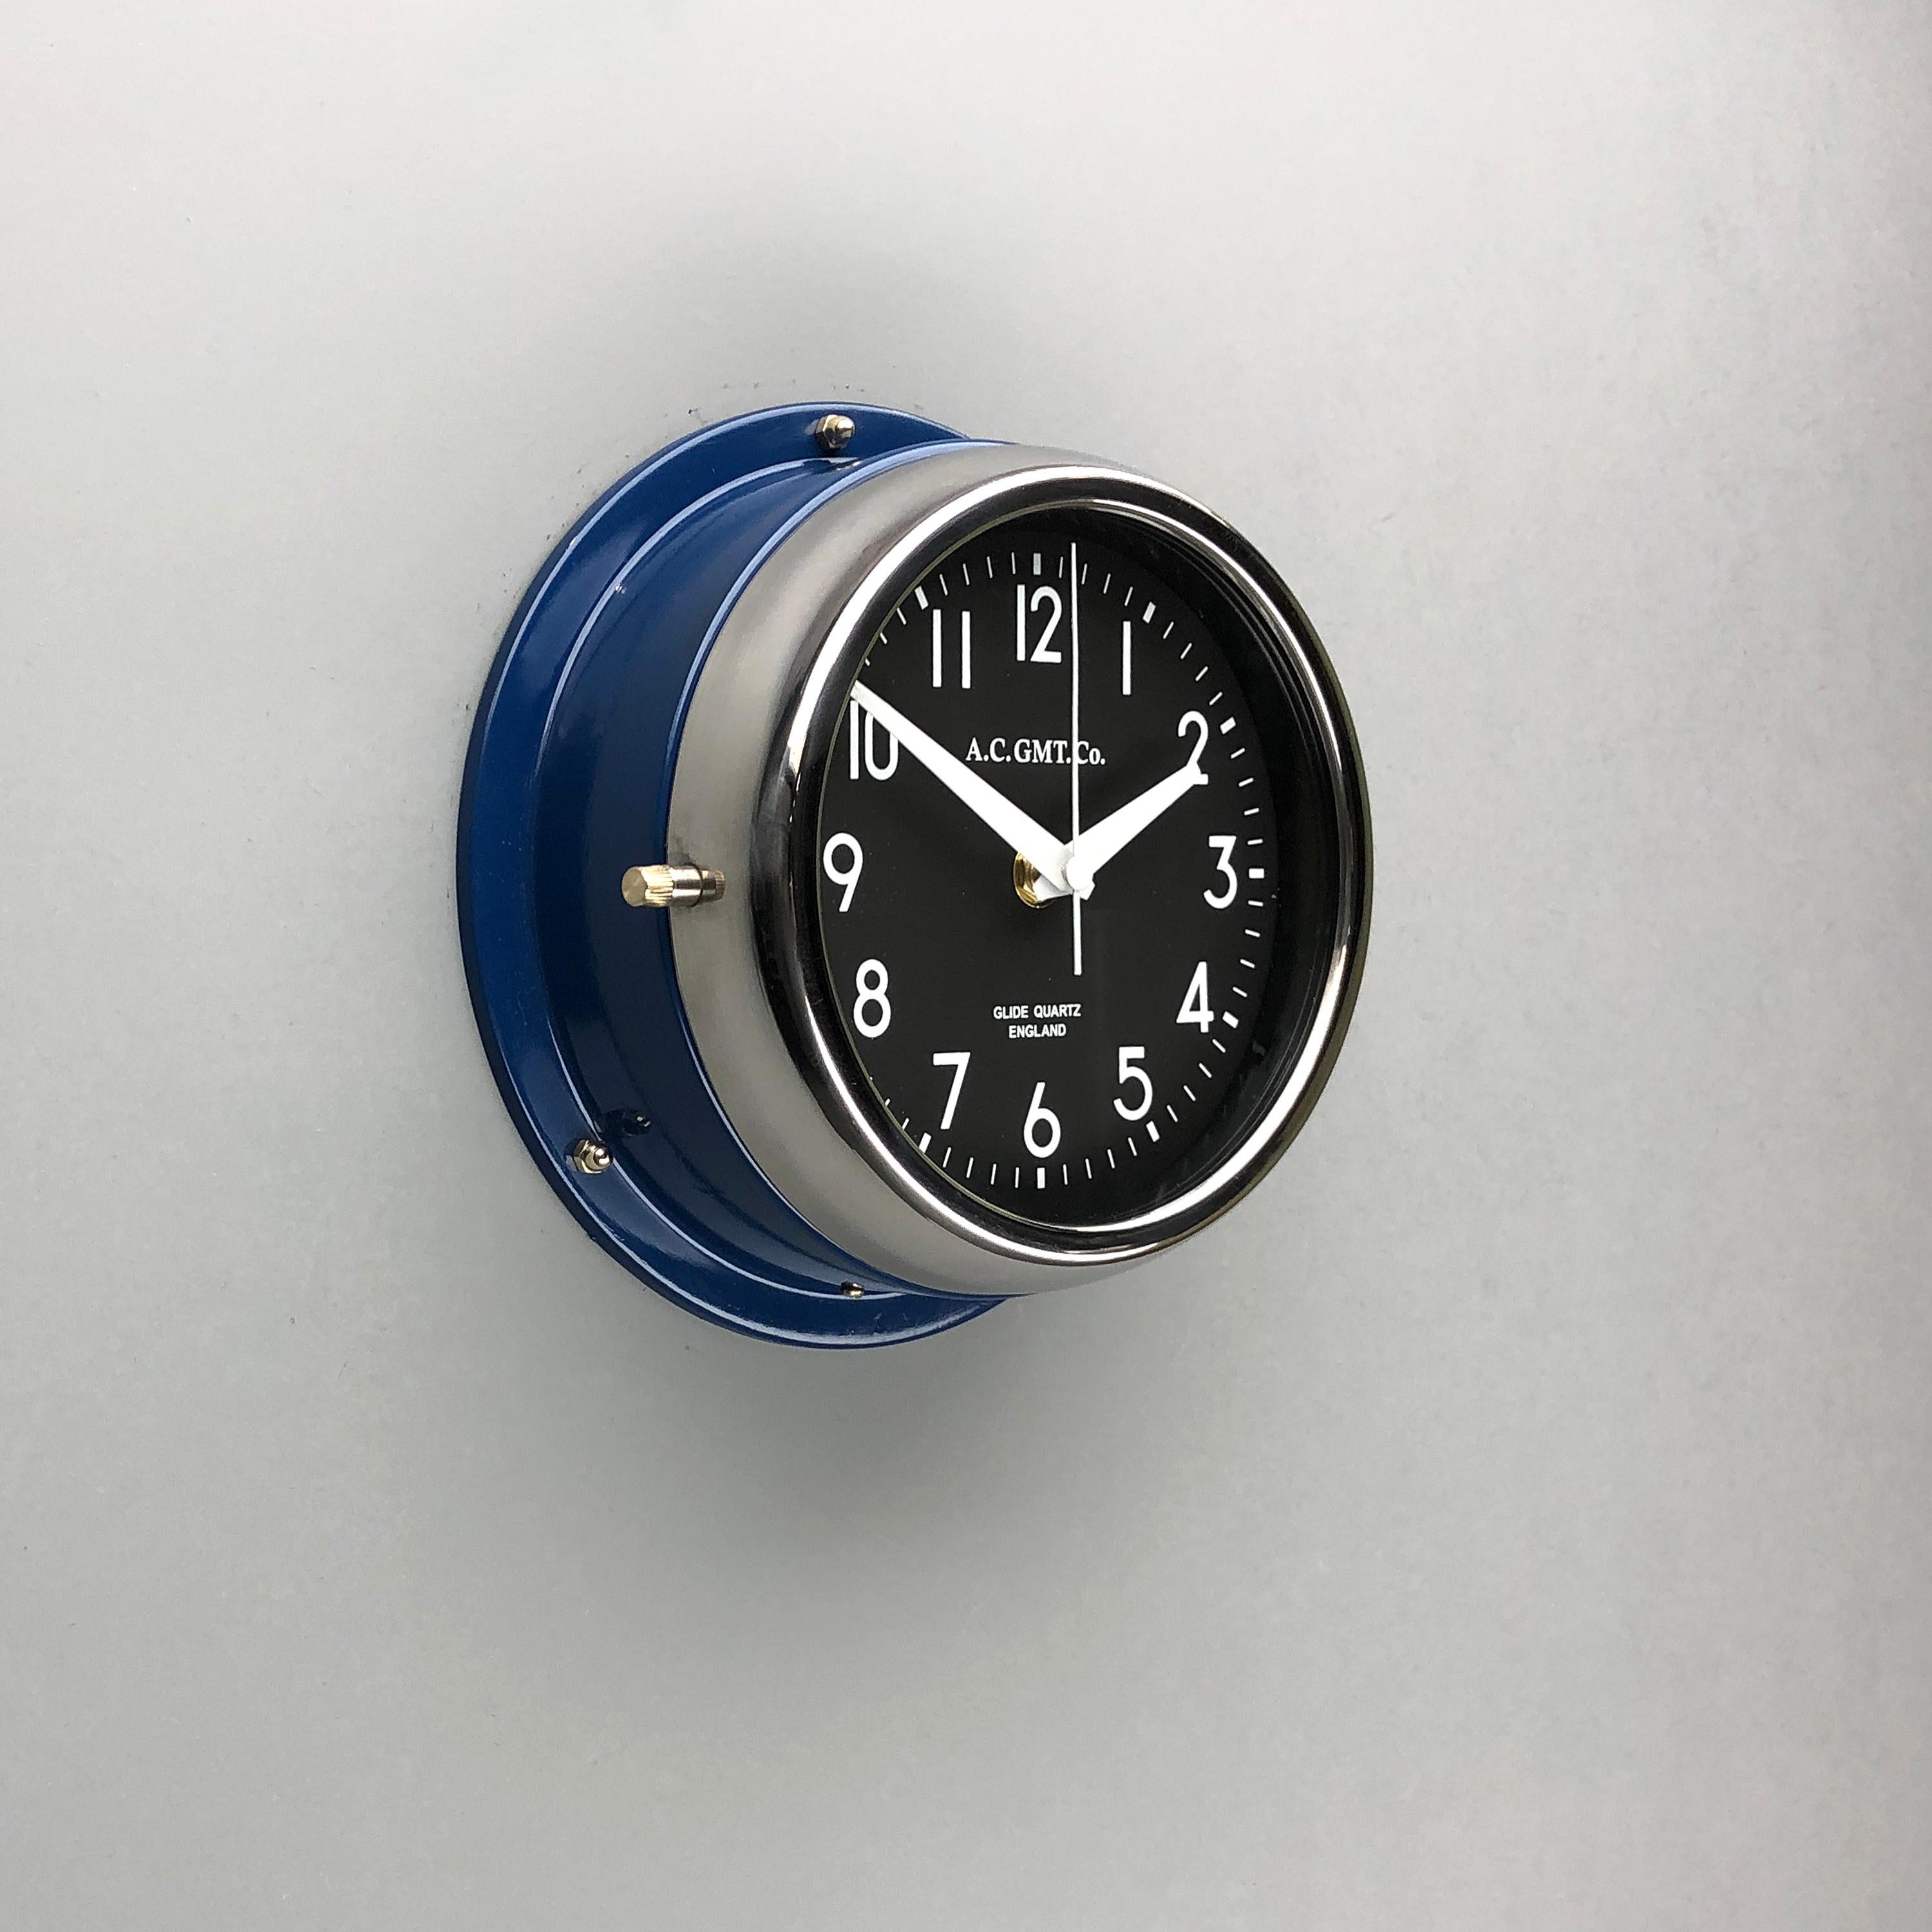 1970s British Classic Blue & Chrome AC.GMT.Co. Industrial Wall Clock Black Dial In Excellent Condition For Sale In Leicester, Leicestershire